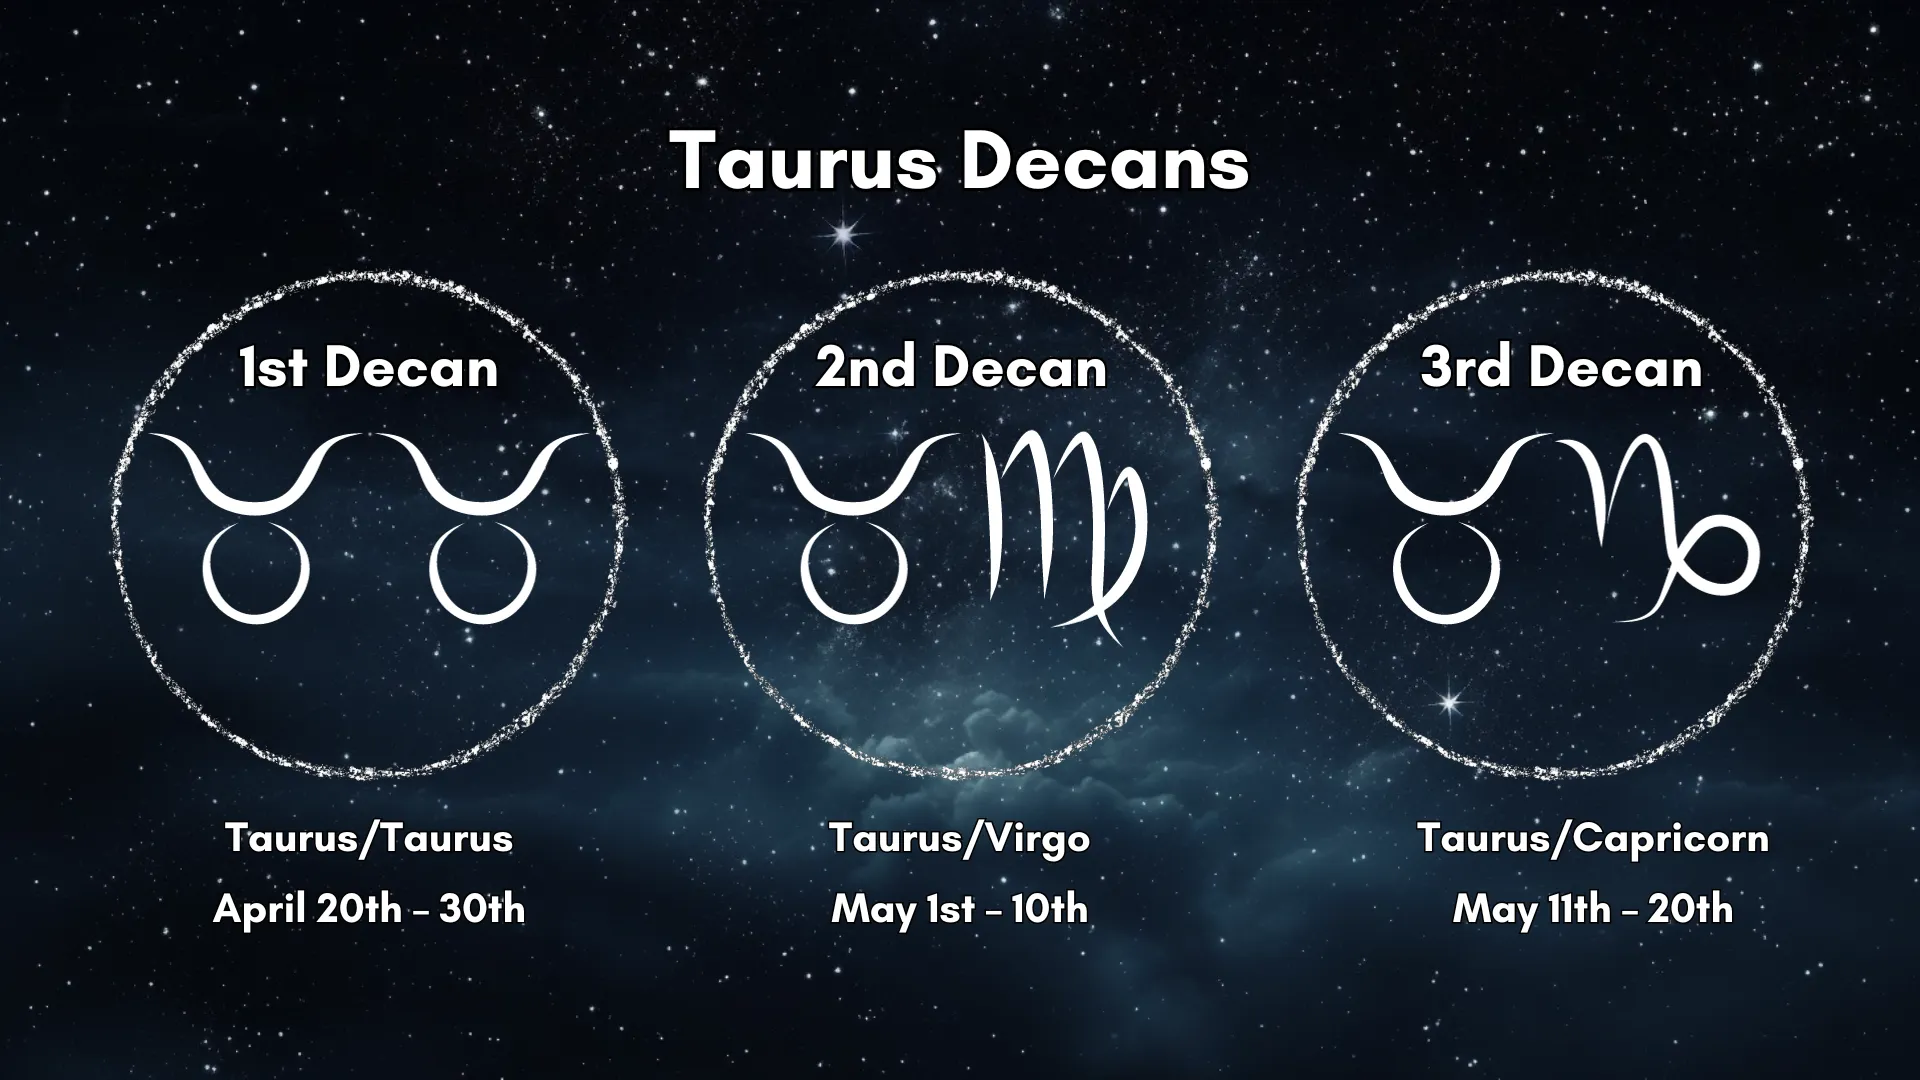 The Taurus Decans are laid out in a chart that is easy to understand.